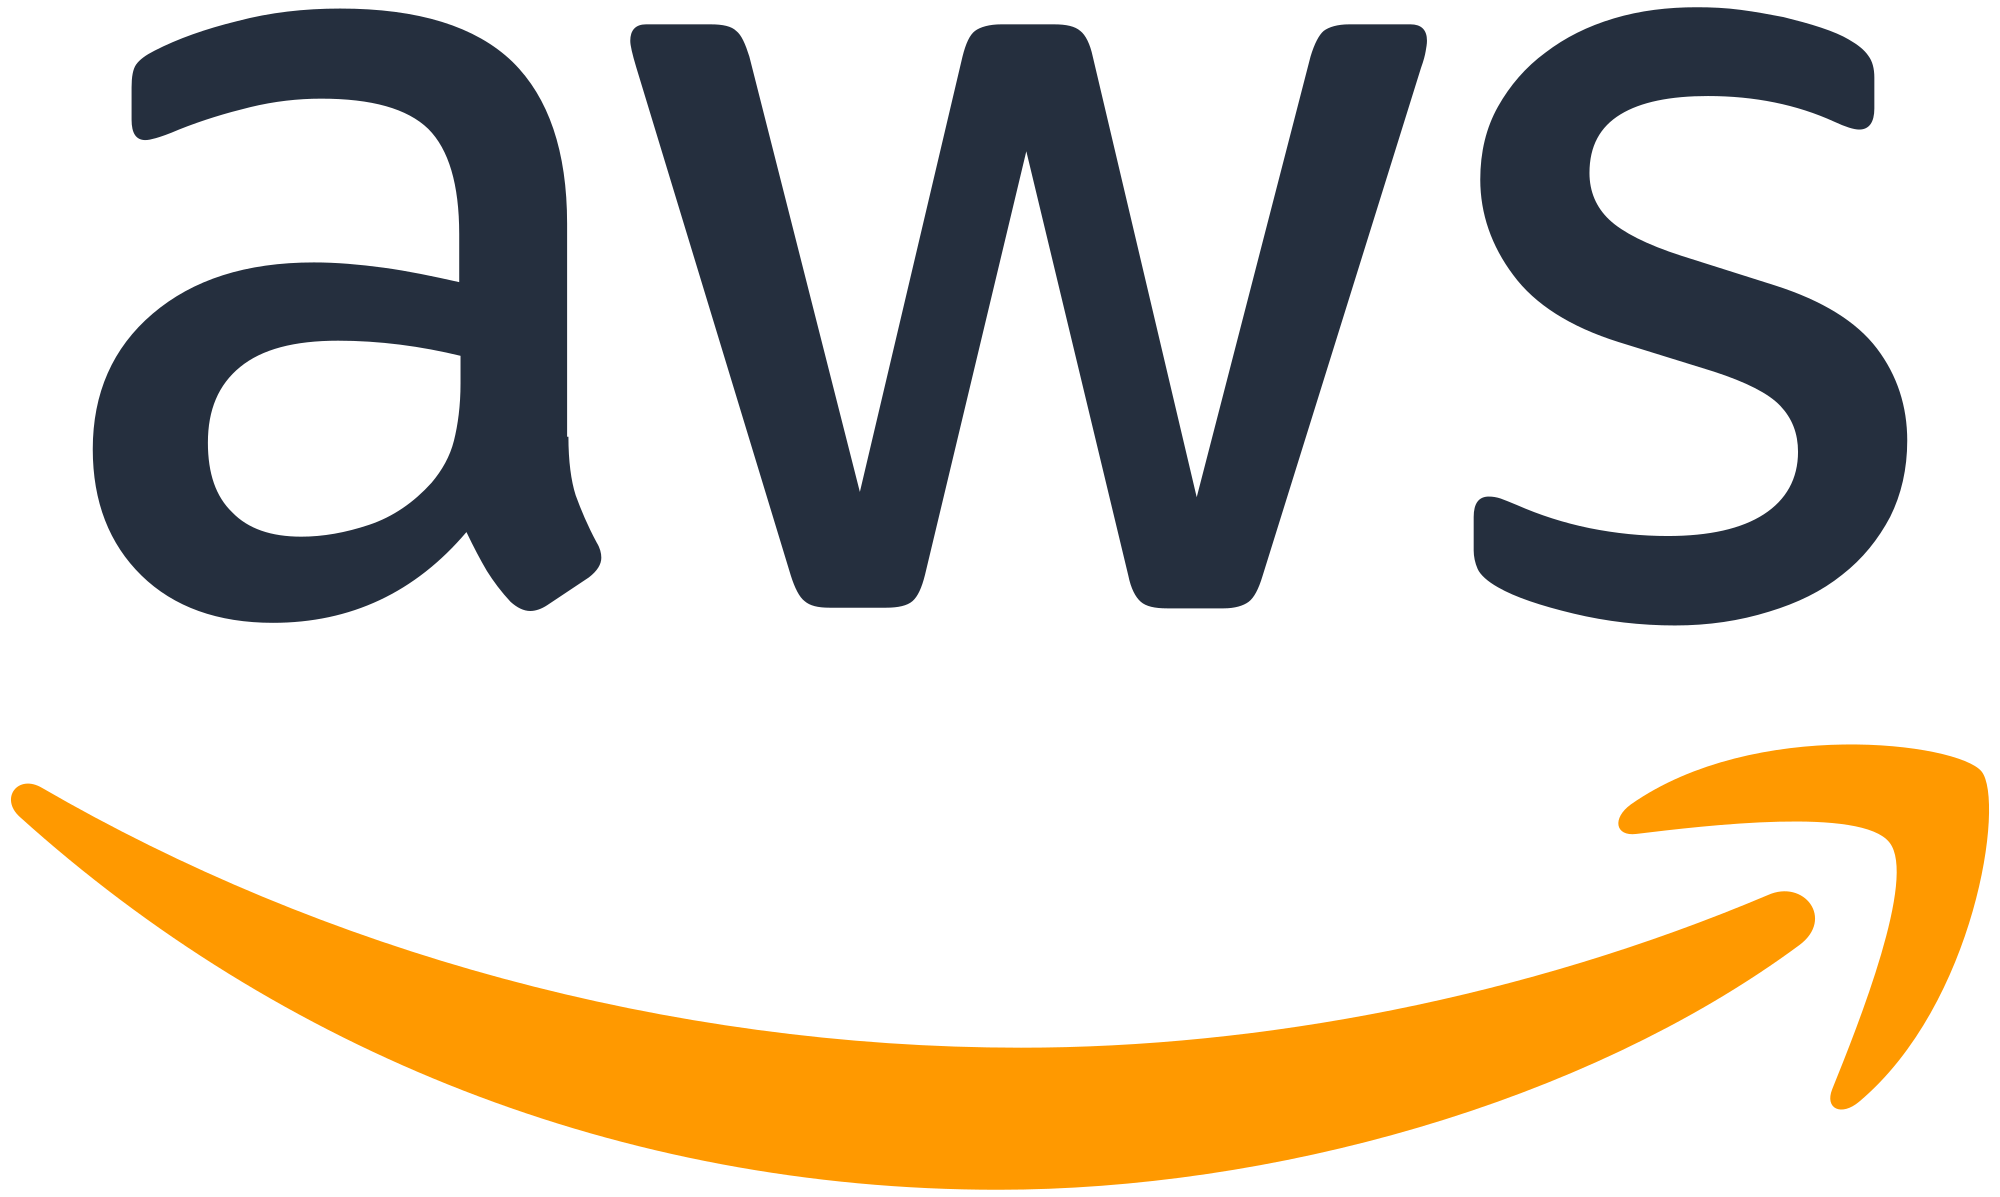 Laird Collaborates with Amazon Web Services on IoT Analytics Service